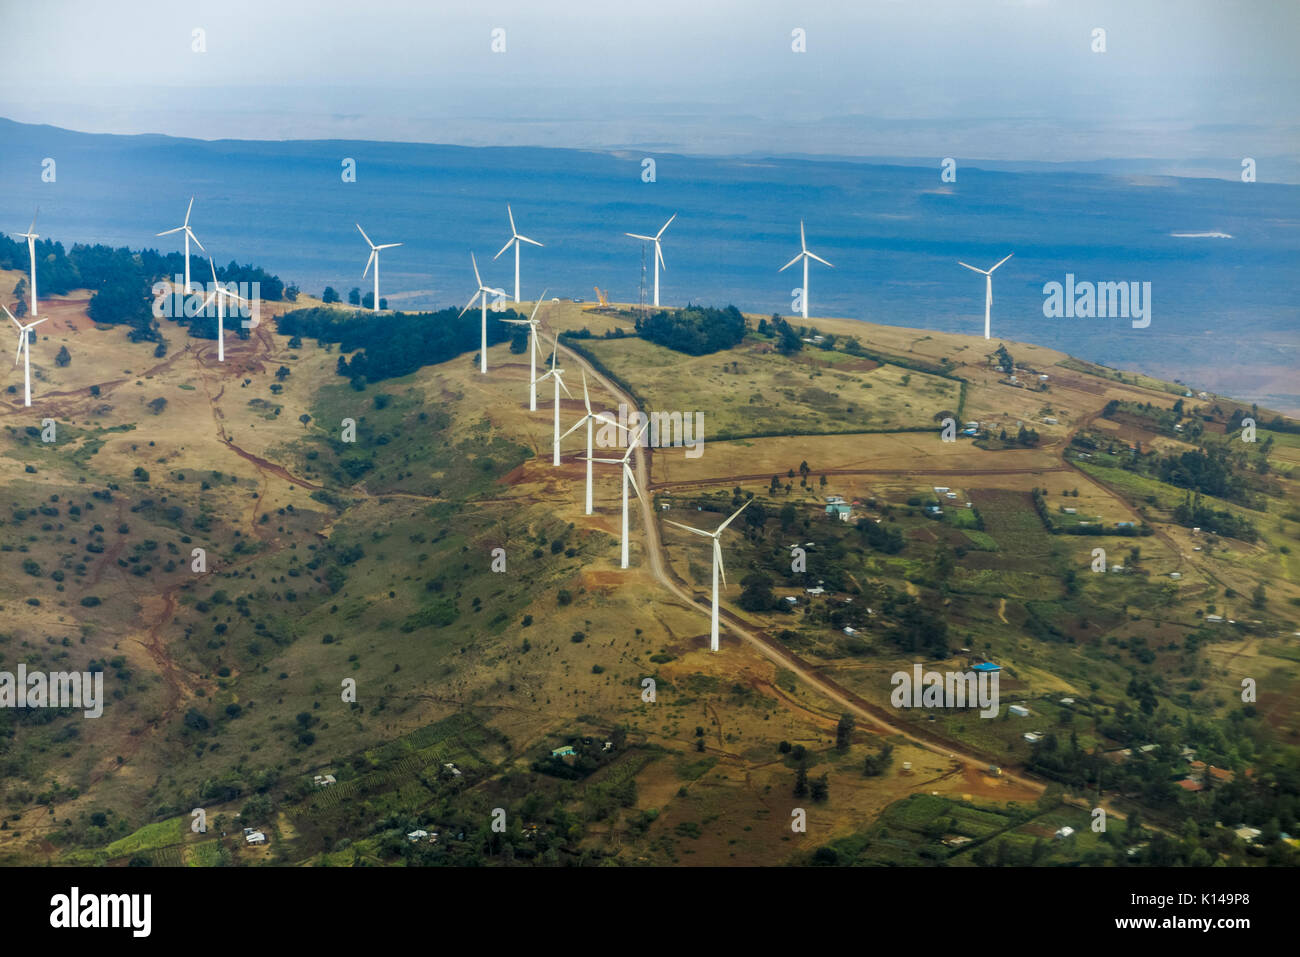 Panorama: wide-angle panoramic aerial view of landscape on the Masai Mara, Kenya with wind turbine power generators on the hillside Stock Photo